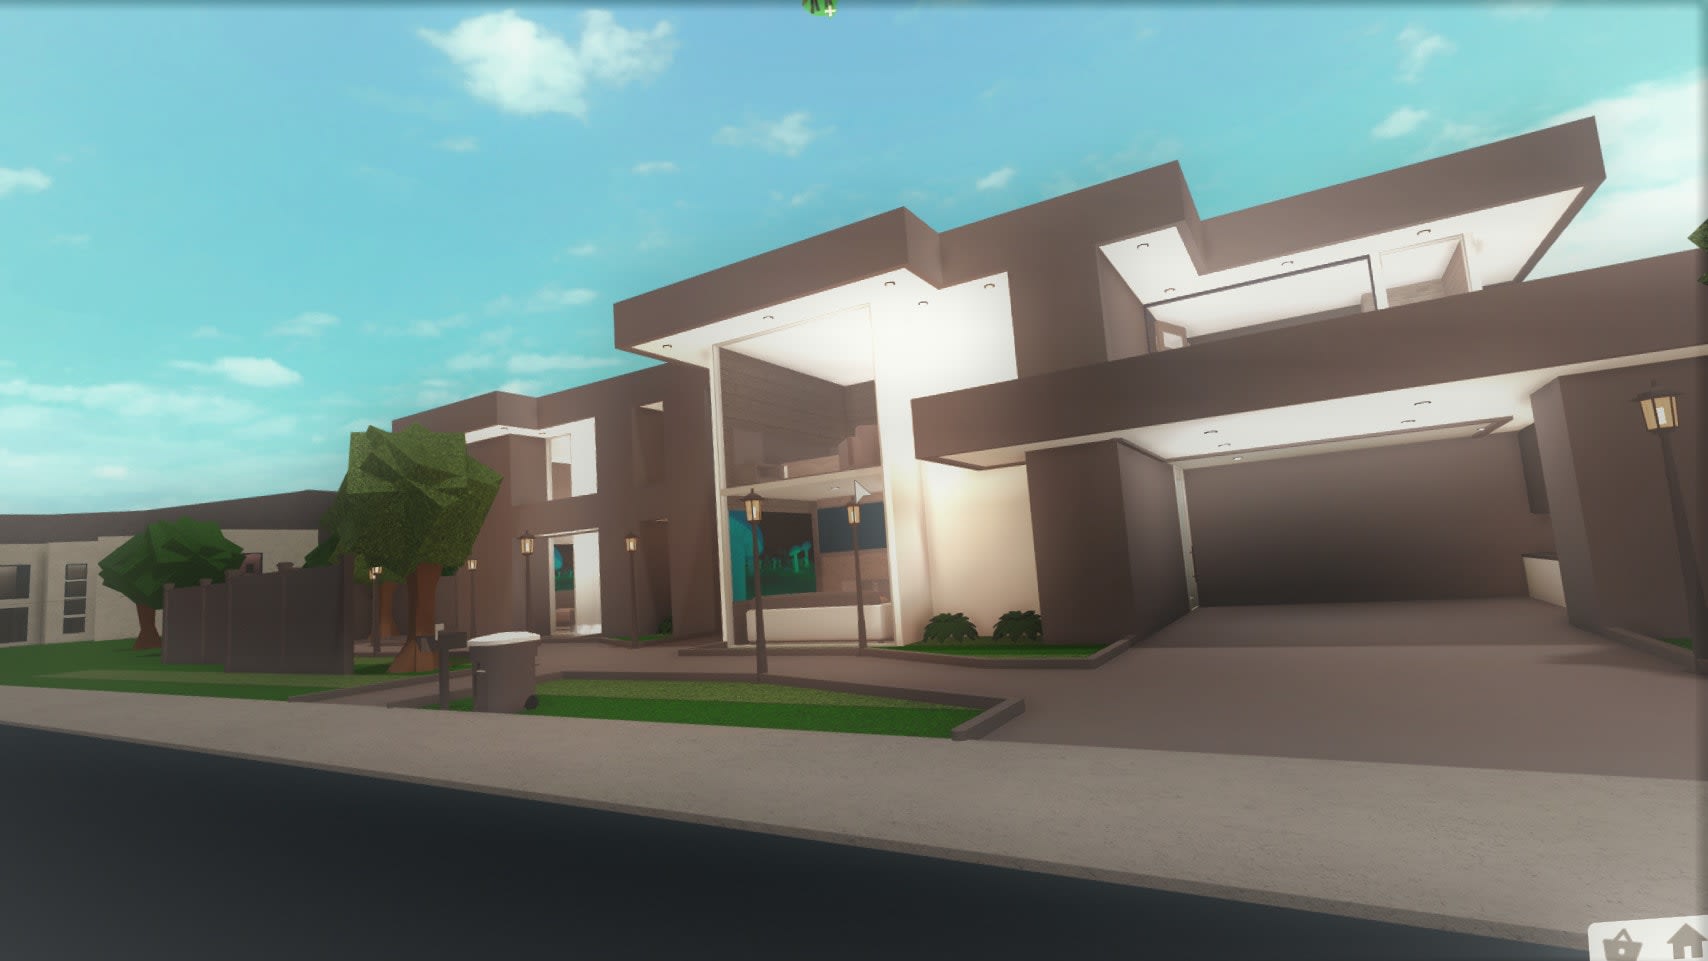 Build You A Roblox Bloxburg House For Cheap By Baggins125 Fiverr - roblox bloxburg houses cheap